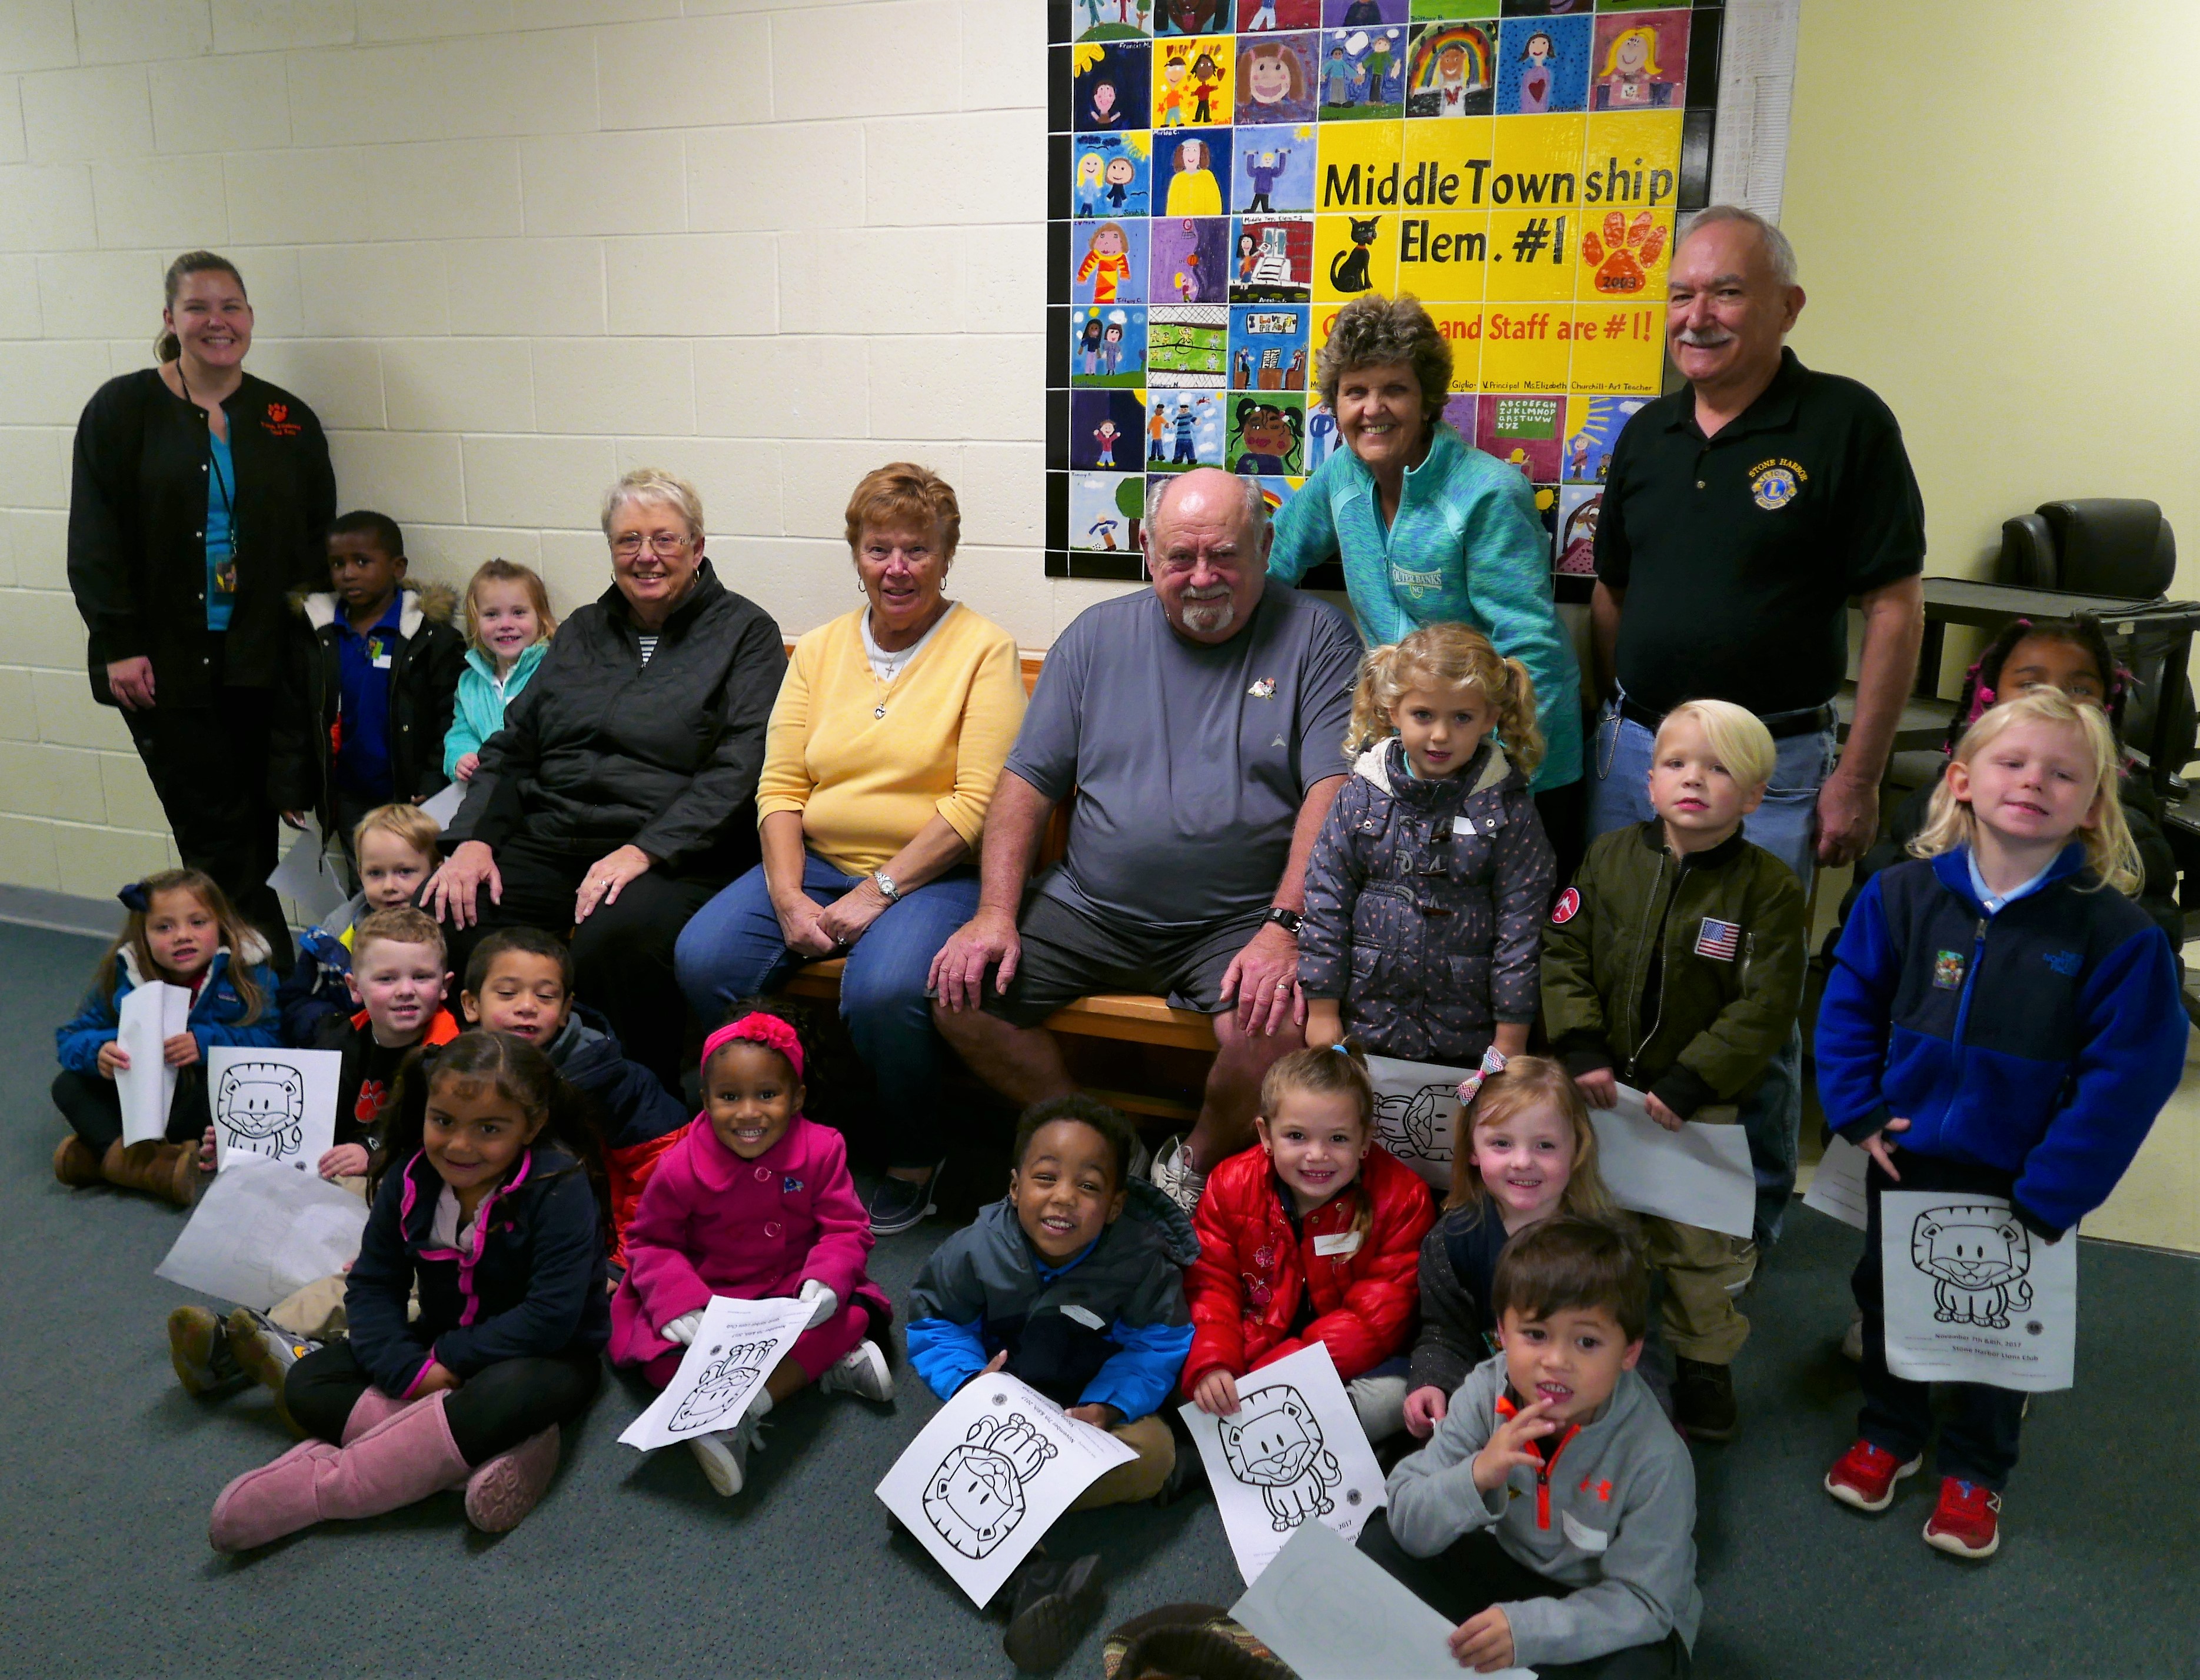 Stone Harbor’s Lion Club Members Provided Free Vision Screenings for Middle Township Students